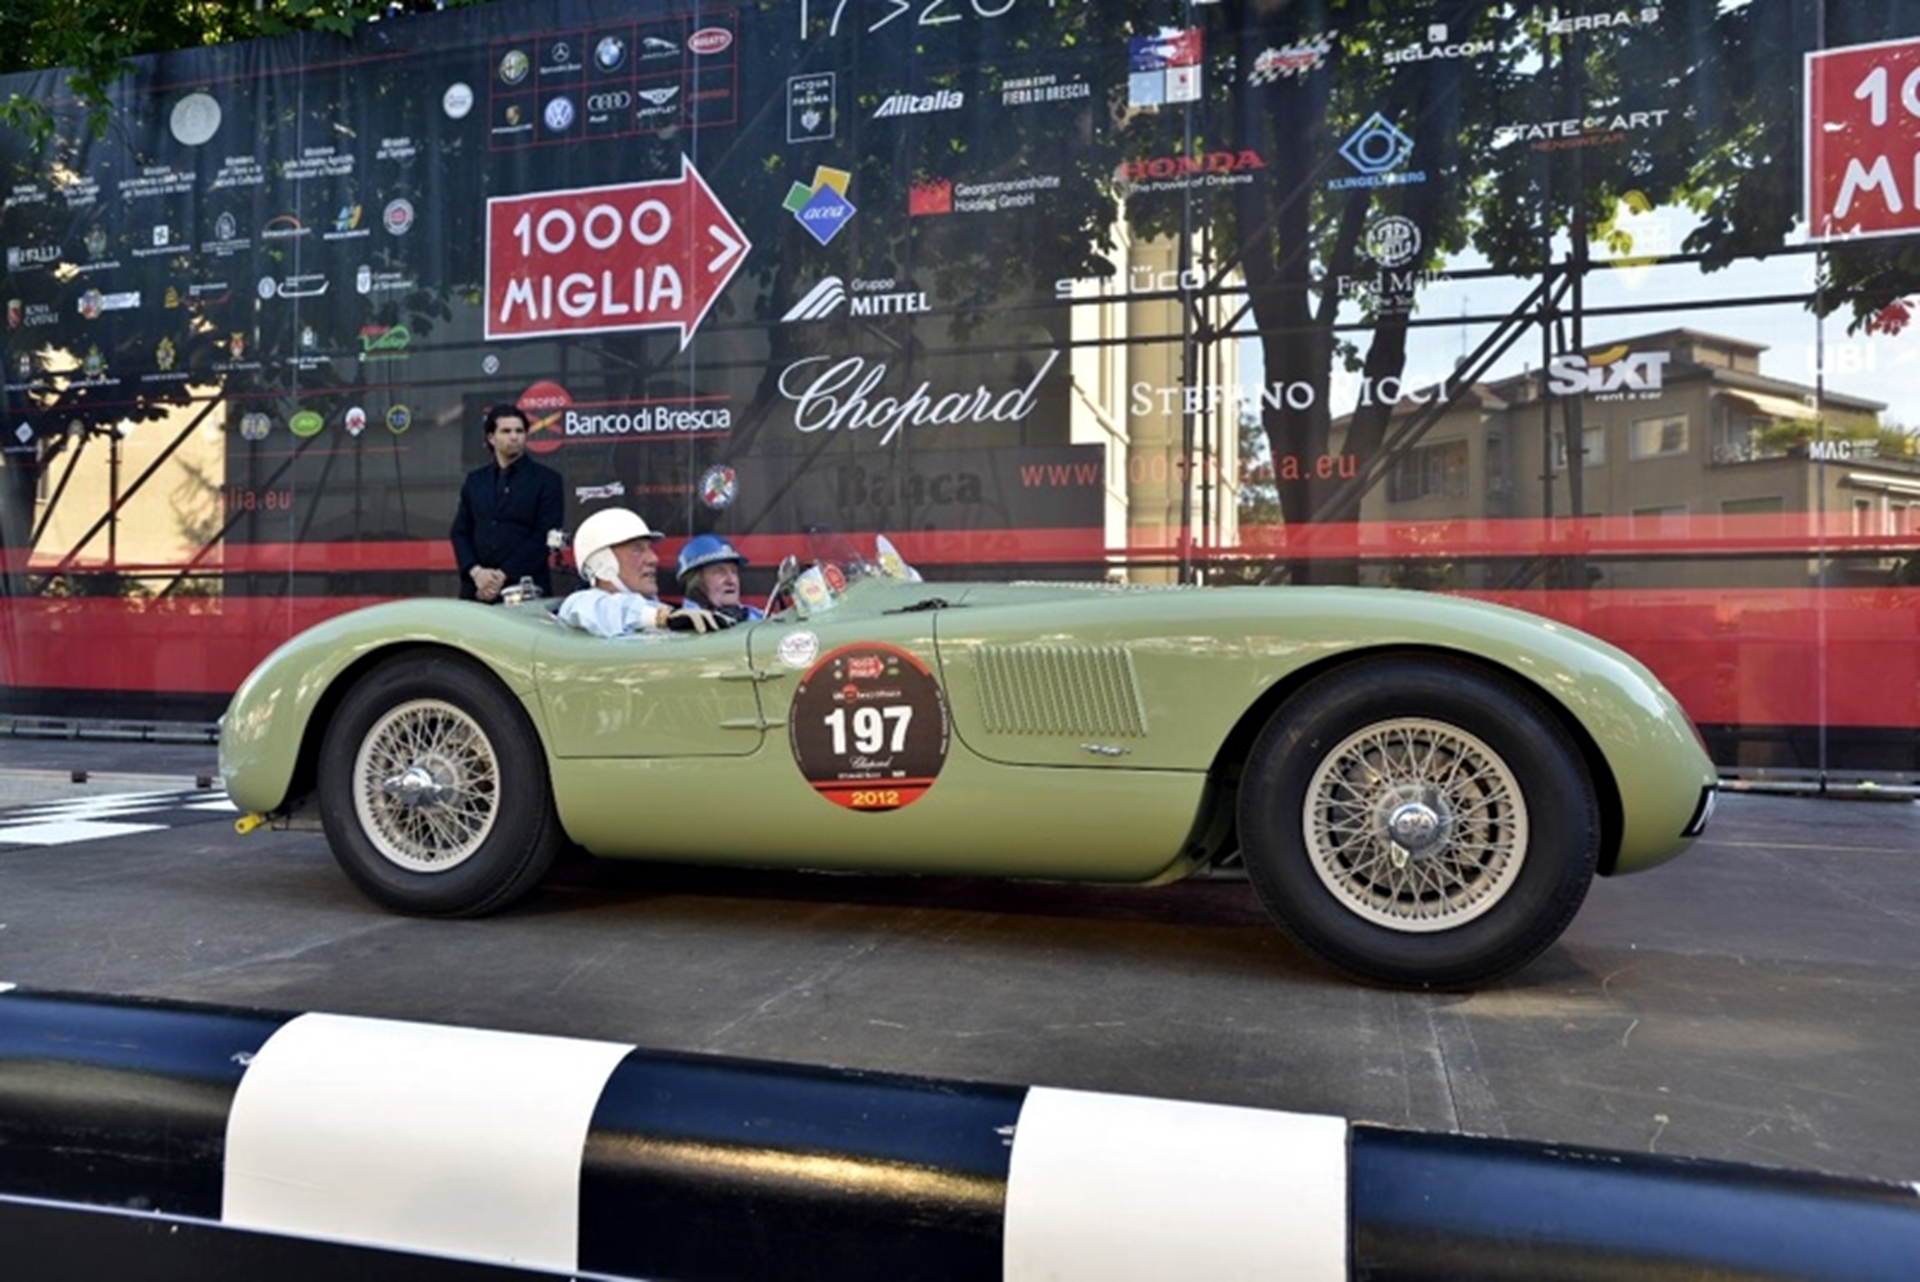 MOSS AND DEWIS RECREATE JAGUAR HISTORY BY STARTING THE 2012 MILLE MIGLIA